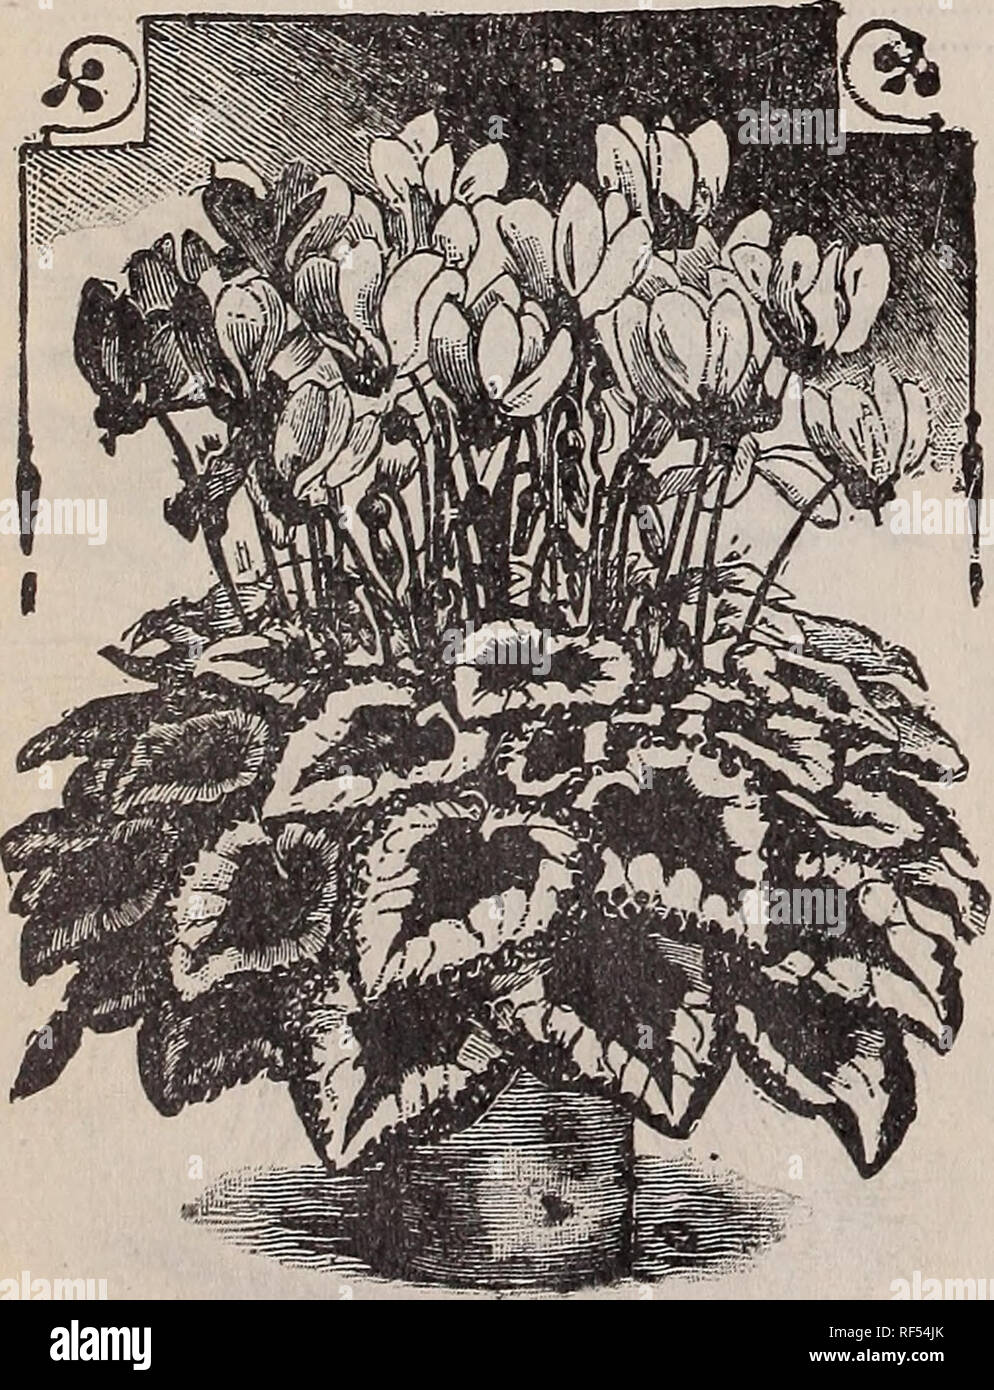 . Catalogue : 1902. Nursery stock Ontario Toronto Catalogs; Vegetables Seeds Catalogs; Flowers Seeds Catalogs; Plants, Ornamental Catalogs; Bulbs (Plants) Catalogs; Fruit Catalogs; Agricultural implements Catalogs. cineraria hybrida grandiflora. 532 CYCLAMEN GIGANTEUM CUPHEA (Cigar Plant) Cuphea Platycentra. Large flowering variety, with countless white blossoms CYPERUS (Umbrella Plant) A strikingly handsome foliage plant, equally well adapted for the greenhouse or open ground. The leaves are striped with white, giving the plant a distinct and fine appearance. Sow early. It is of easy culture. Stock Photo